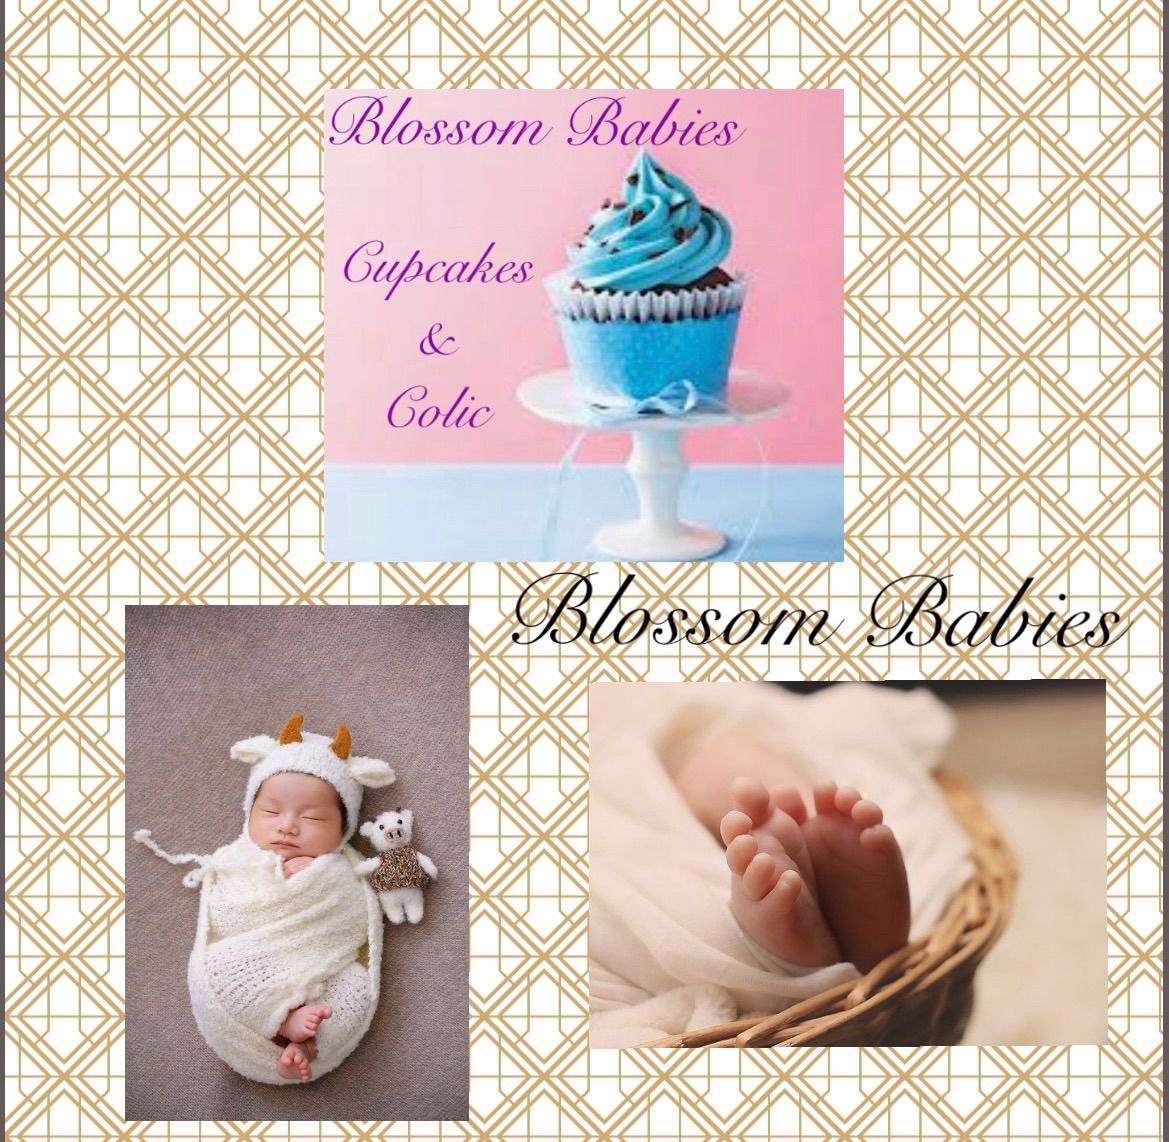 Blossom Babies Cupcakes & Colic session 